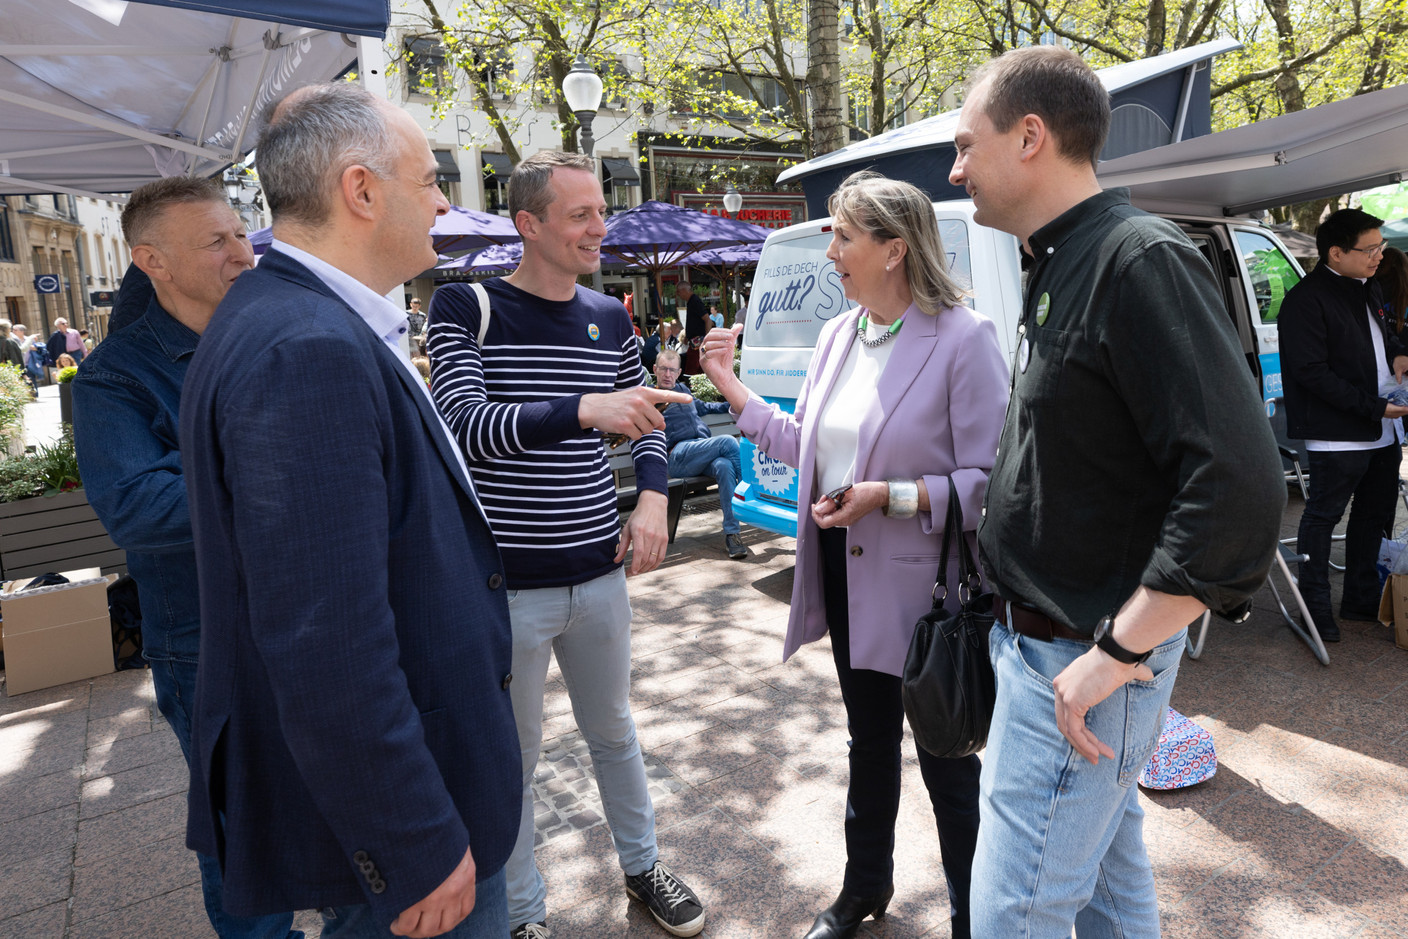 Serge Wilmes (CSV), Lydie Polfer (DP) and François Benoy (déi Gréng) at the market on 13 May as campaigning for the local elections got underway in Luxembourg City. Photo: Guy Wolff/Maison Moderne